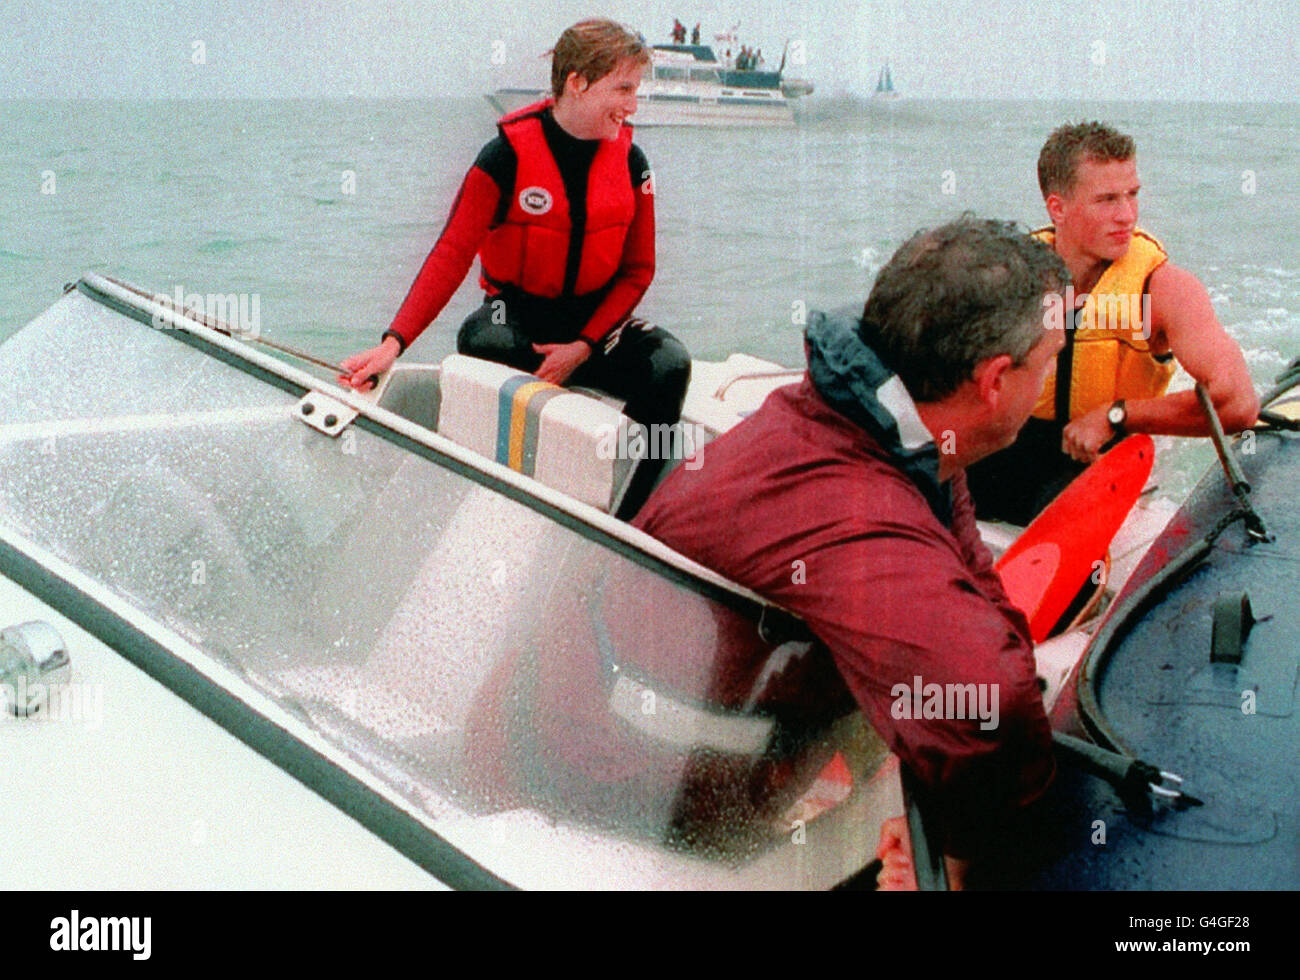 PA NEWS PHOTO 31/7/94 Prince Edward's girlfriend Sophie Rhys-Jones onboard a speedboat which picked her up after she fell whilst water Skiining. Peter Phillips, the son of the Princess Royal is on the right. Stock Photo